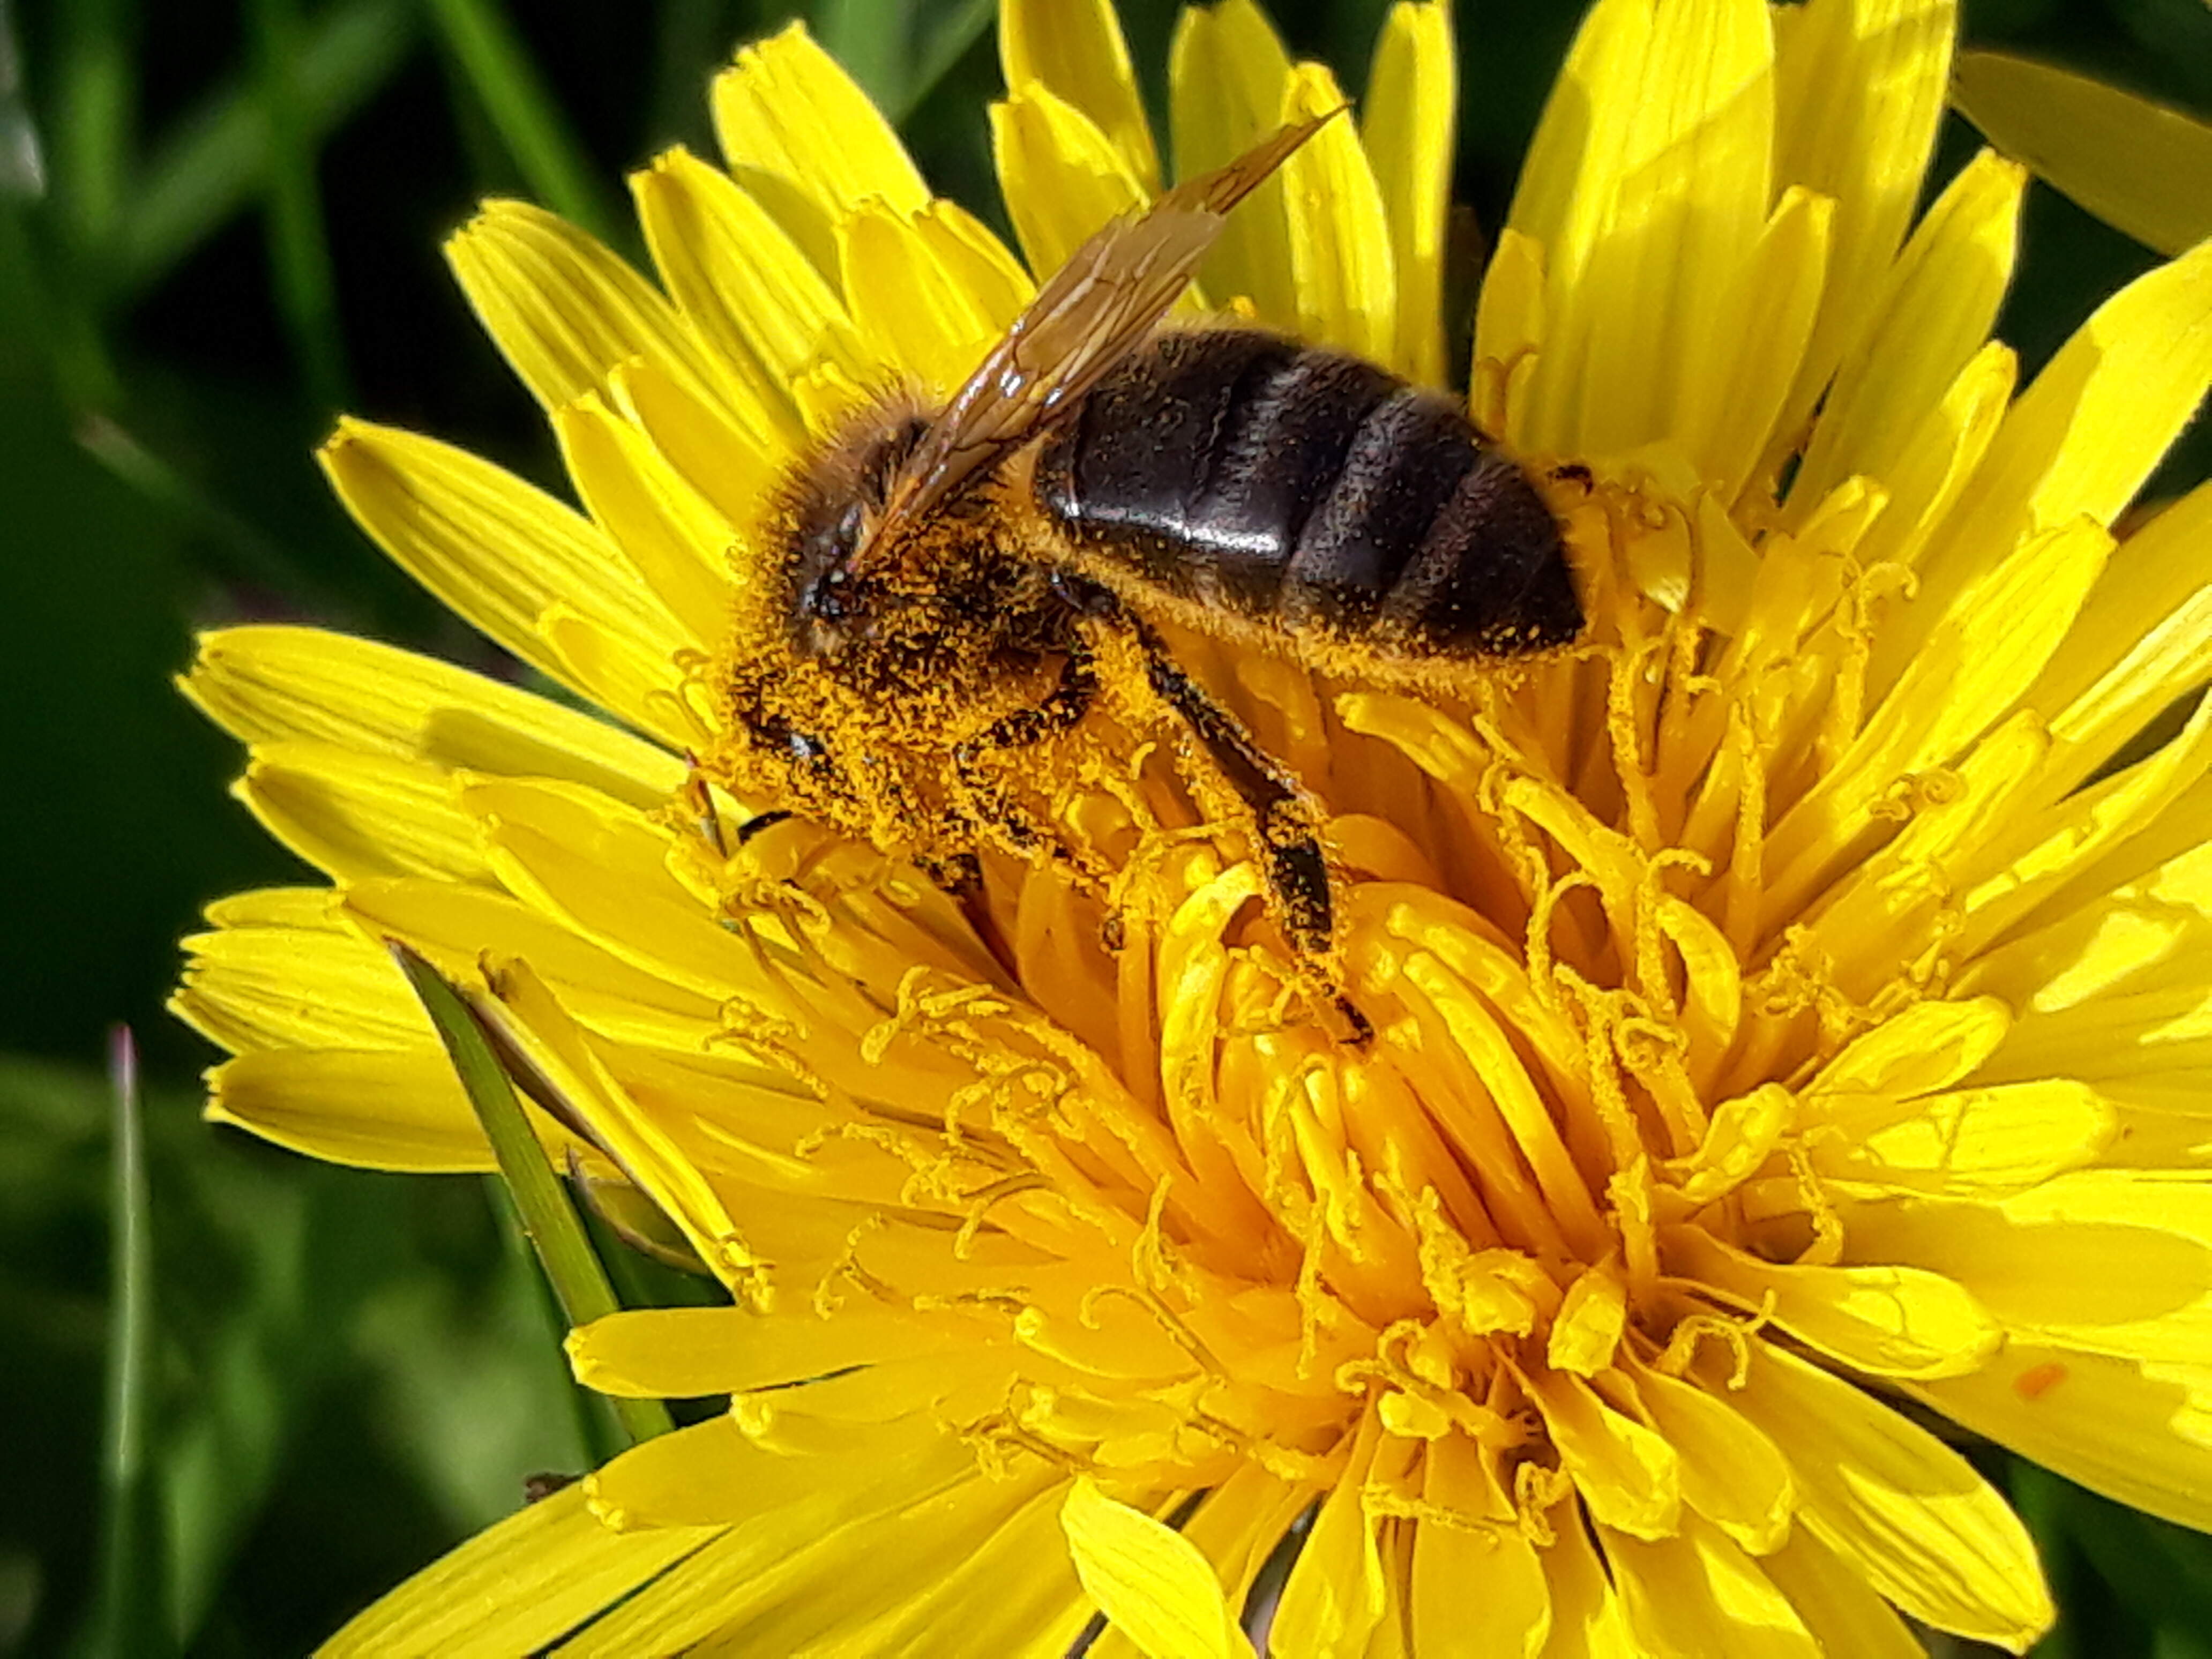 dandelion are a prime source of pollen and nectar for many insects